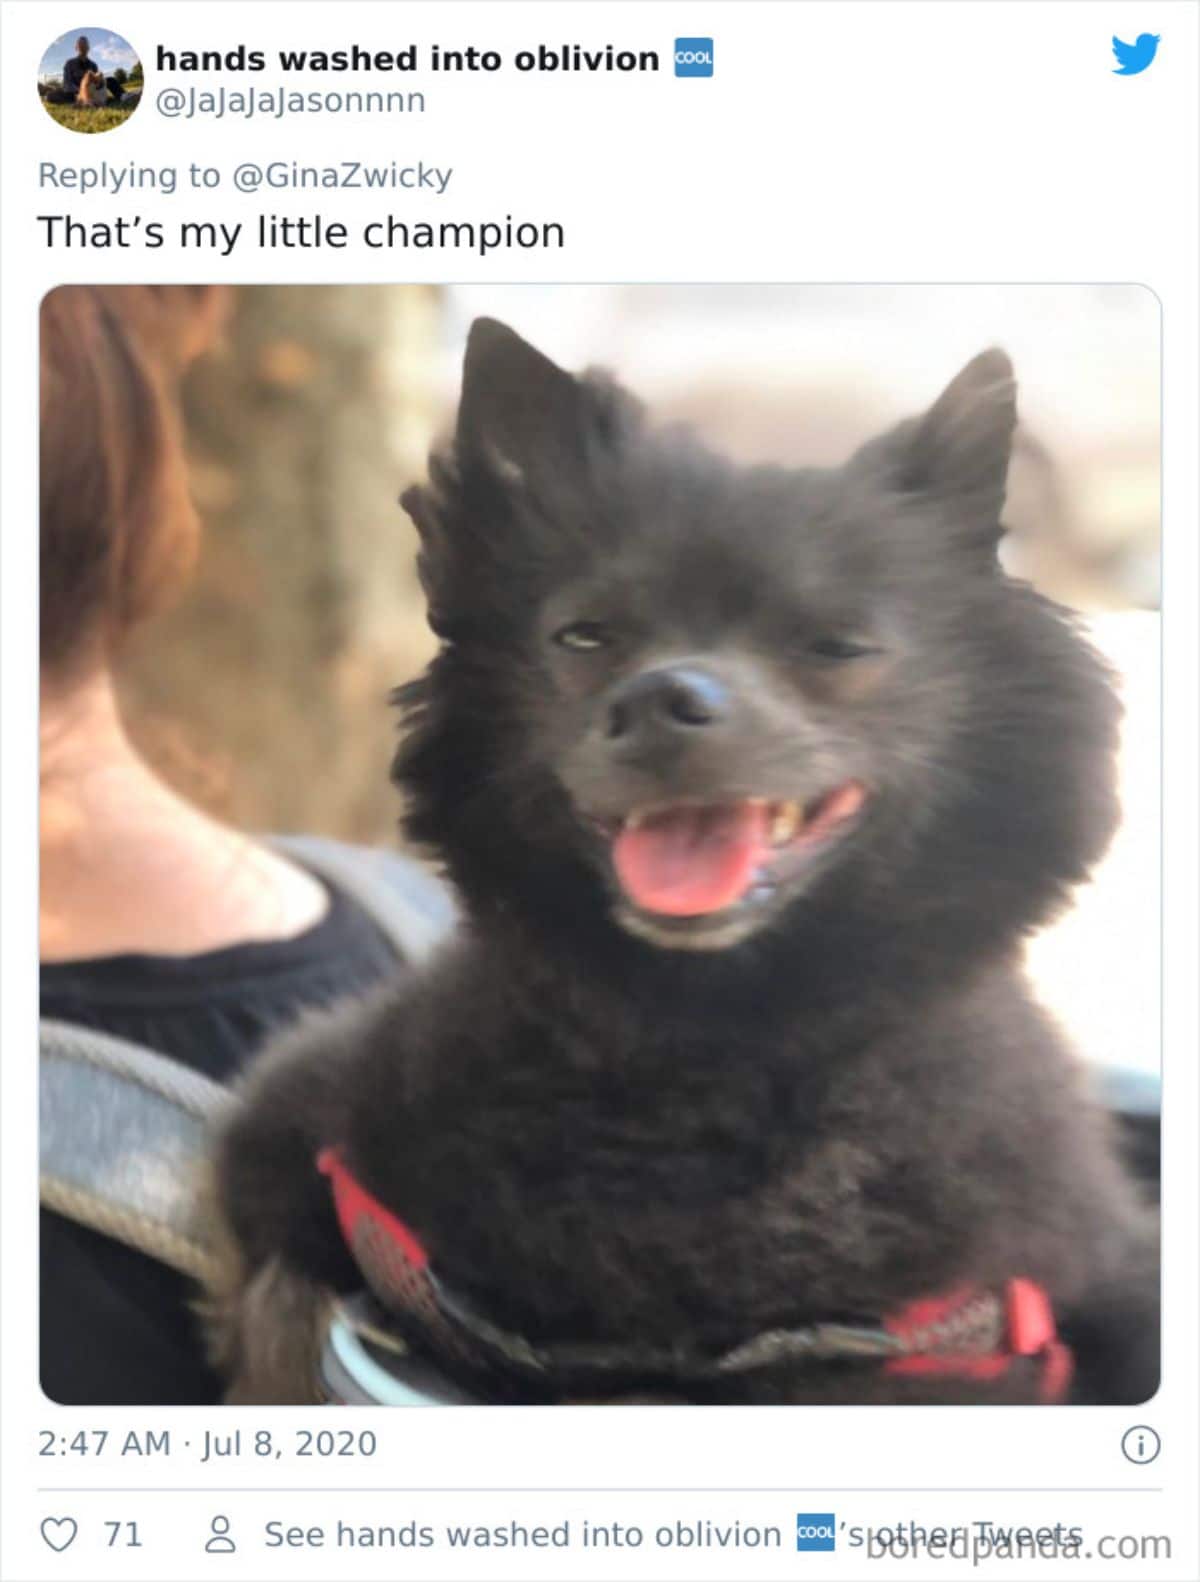 tweet of a small black flufyf dog held by someone and the dog has its mouth open and showing its tongue